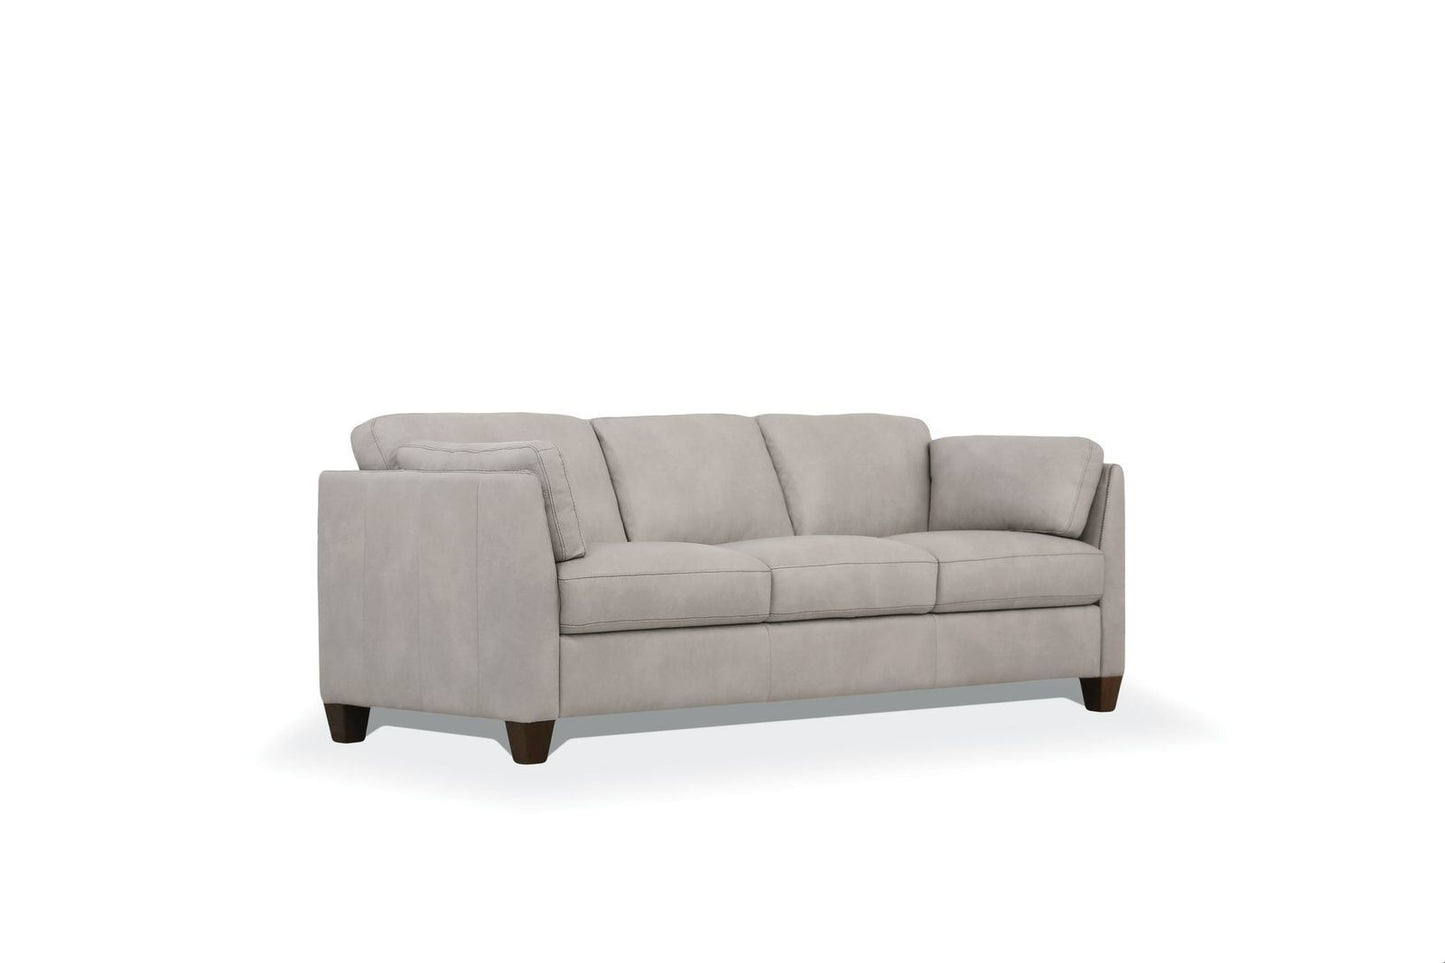 Matias Sofa, Dusty White Leather by ACME